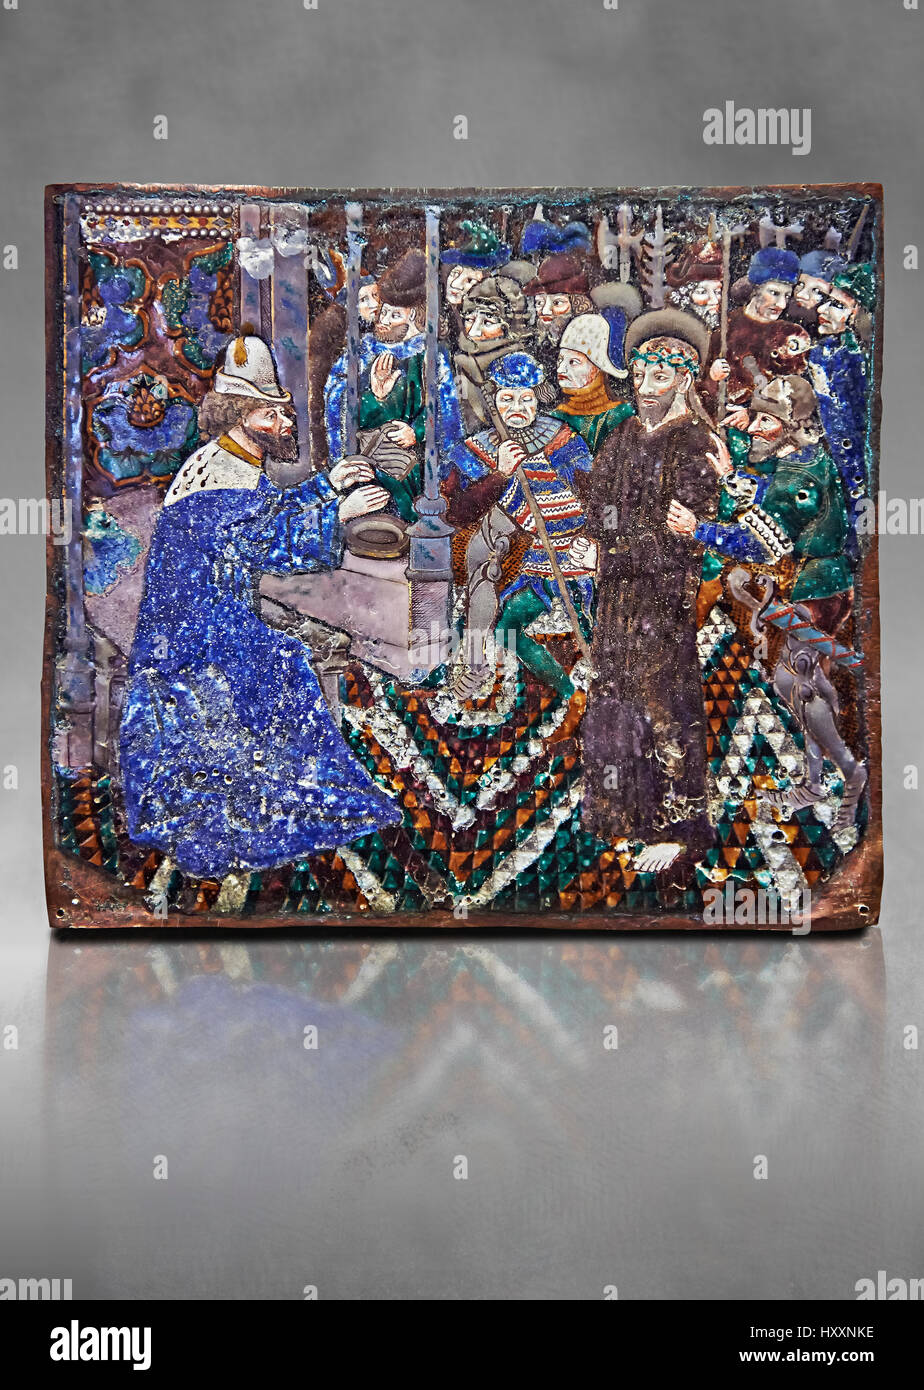 Enamelled plaque depicting Christ’s being tried by Pilate, Limoges late 15th century,  Master Pseudo-Monvaerni. inv 6309, The Louvre Museum, Paris. Stock Photo